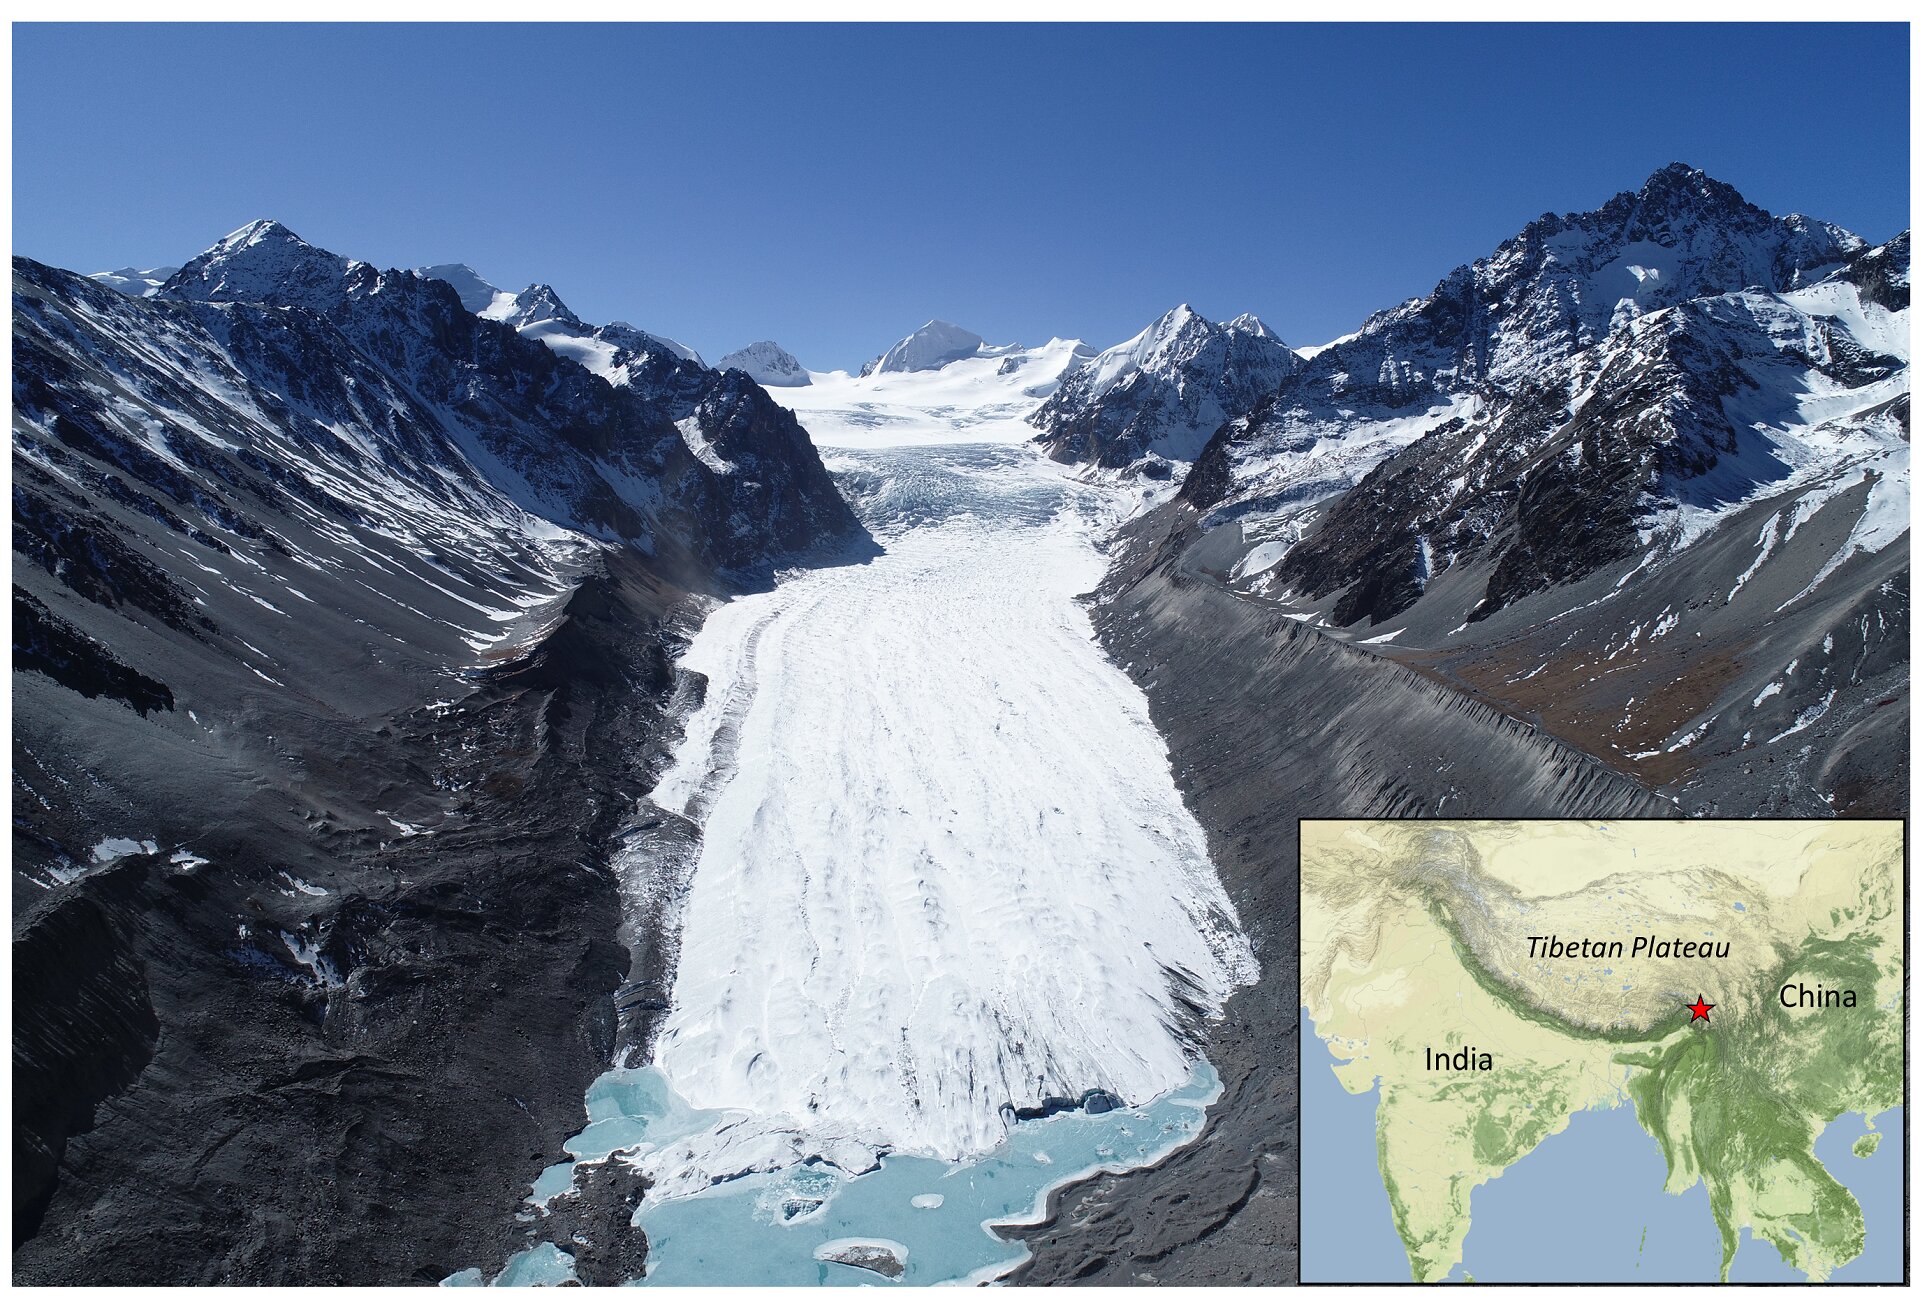 Why are the glaciers in southeast Tibet melting so fast?